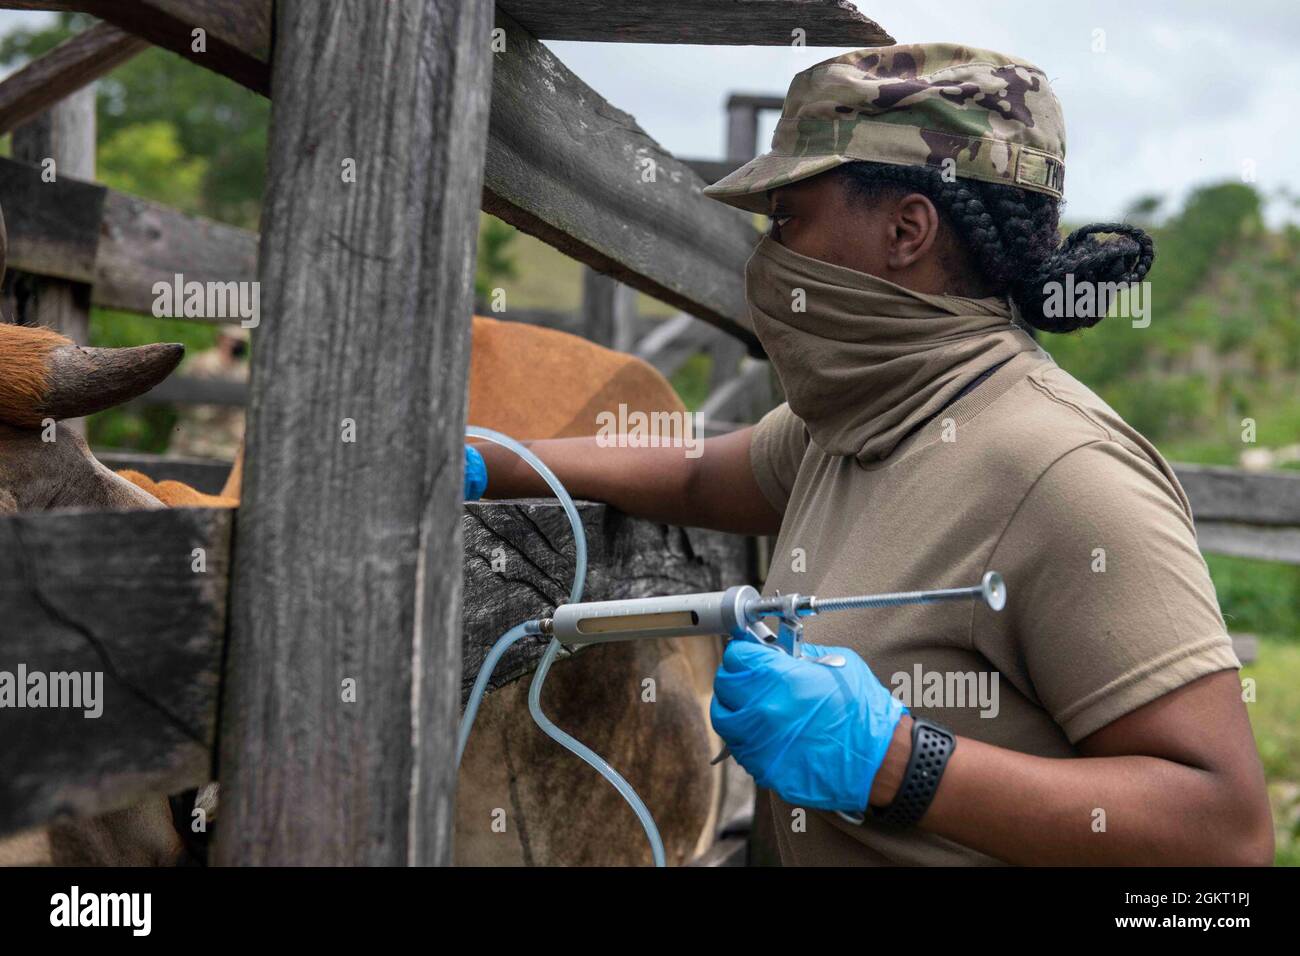 U.S. Army Capt. Shanell Thomas, a veterinarian with the 109th Medical Detachment Veterinary Services out of Garden Grove, California, vaccinates cattle during the Veterinary Readiness Training Exercises portion of Resolute Sentinel 21 in Melchor De Mencos, Guatemala, June 24, 2021. The vet team will provide large animal care education and vaccinations at various locations. Stock Photo